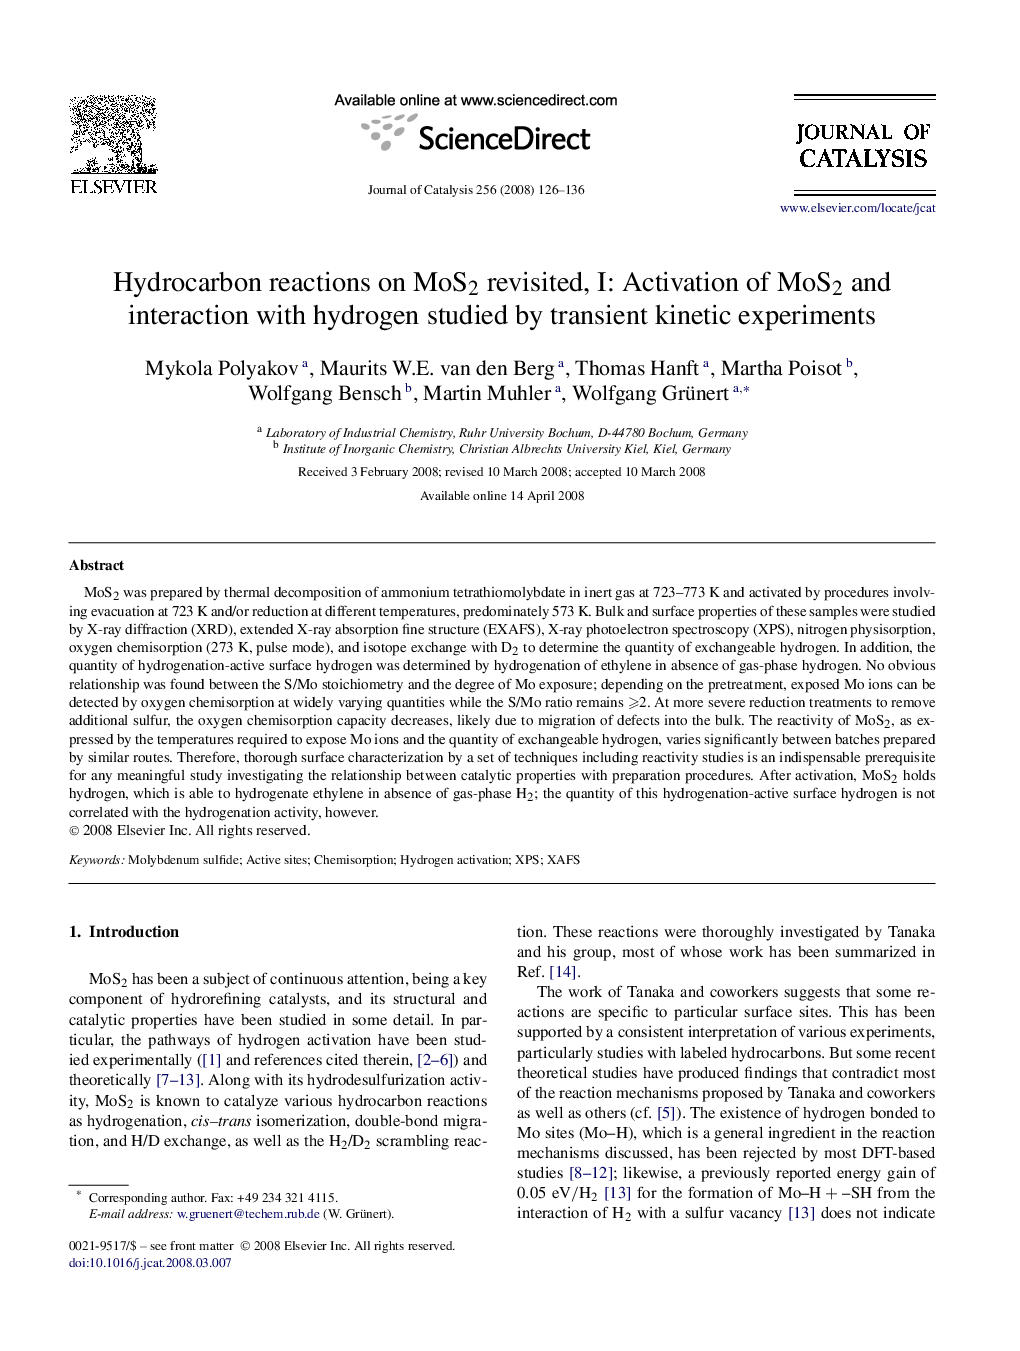 Hydrocarbon reactions on MoS2 revisited, I: Activation of MoS2 and interaction with hydrogen studied by transient kinetic experiments